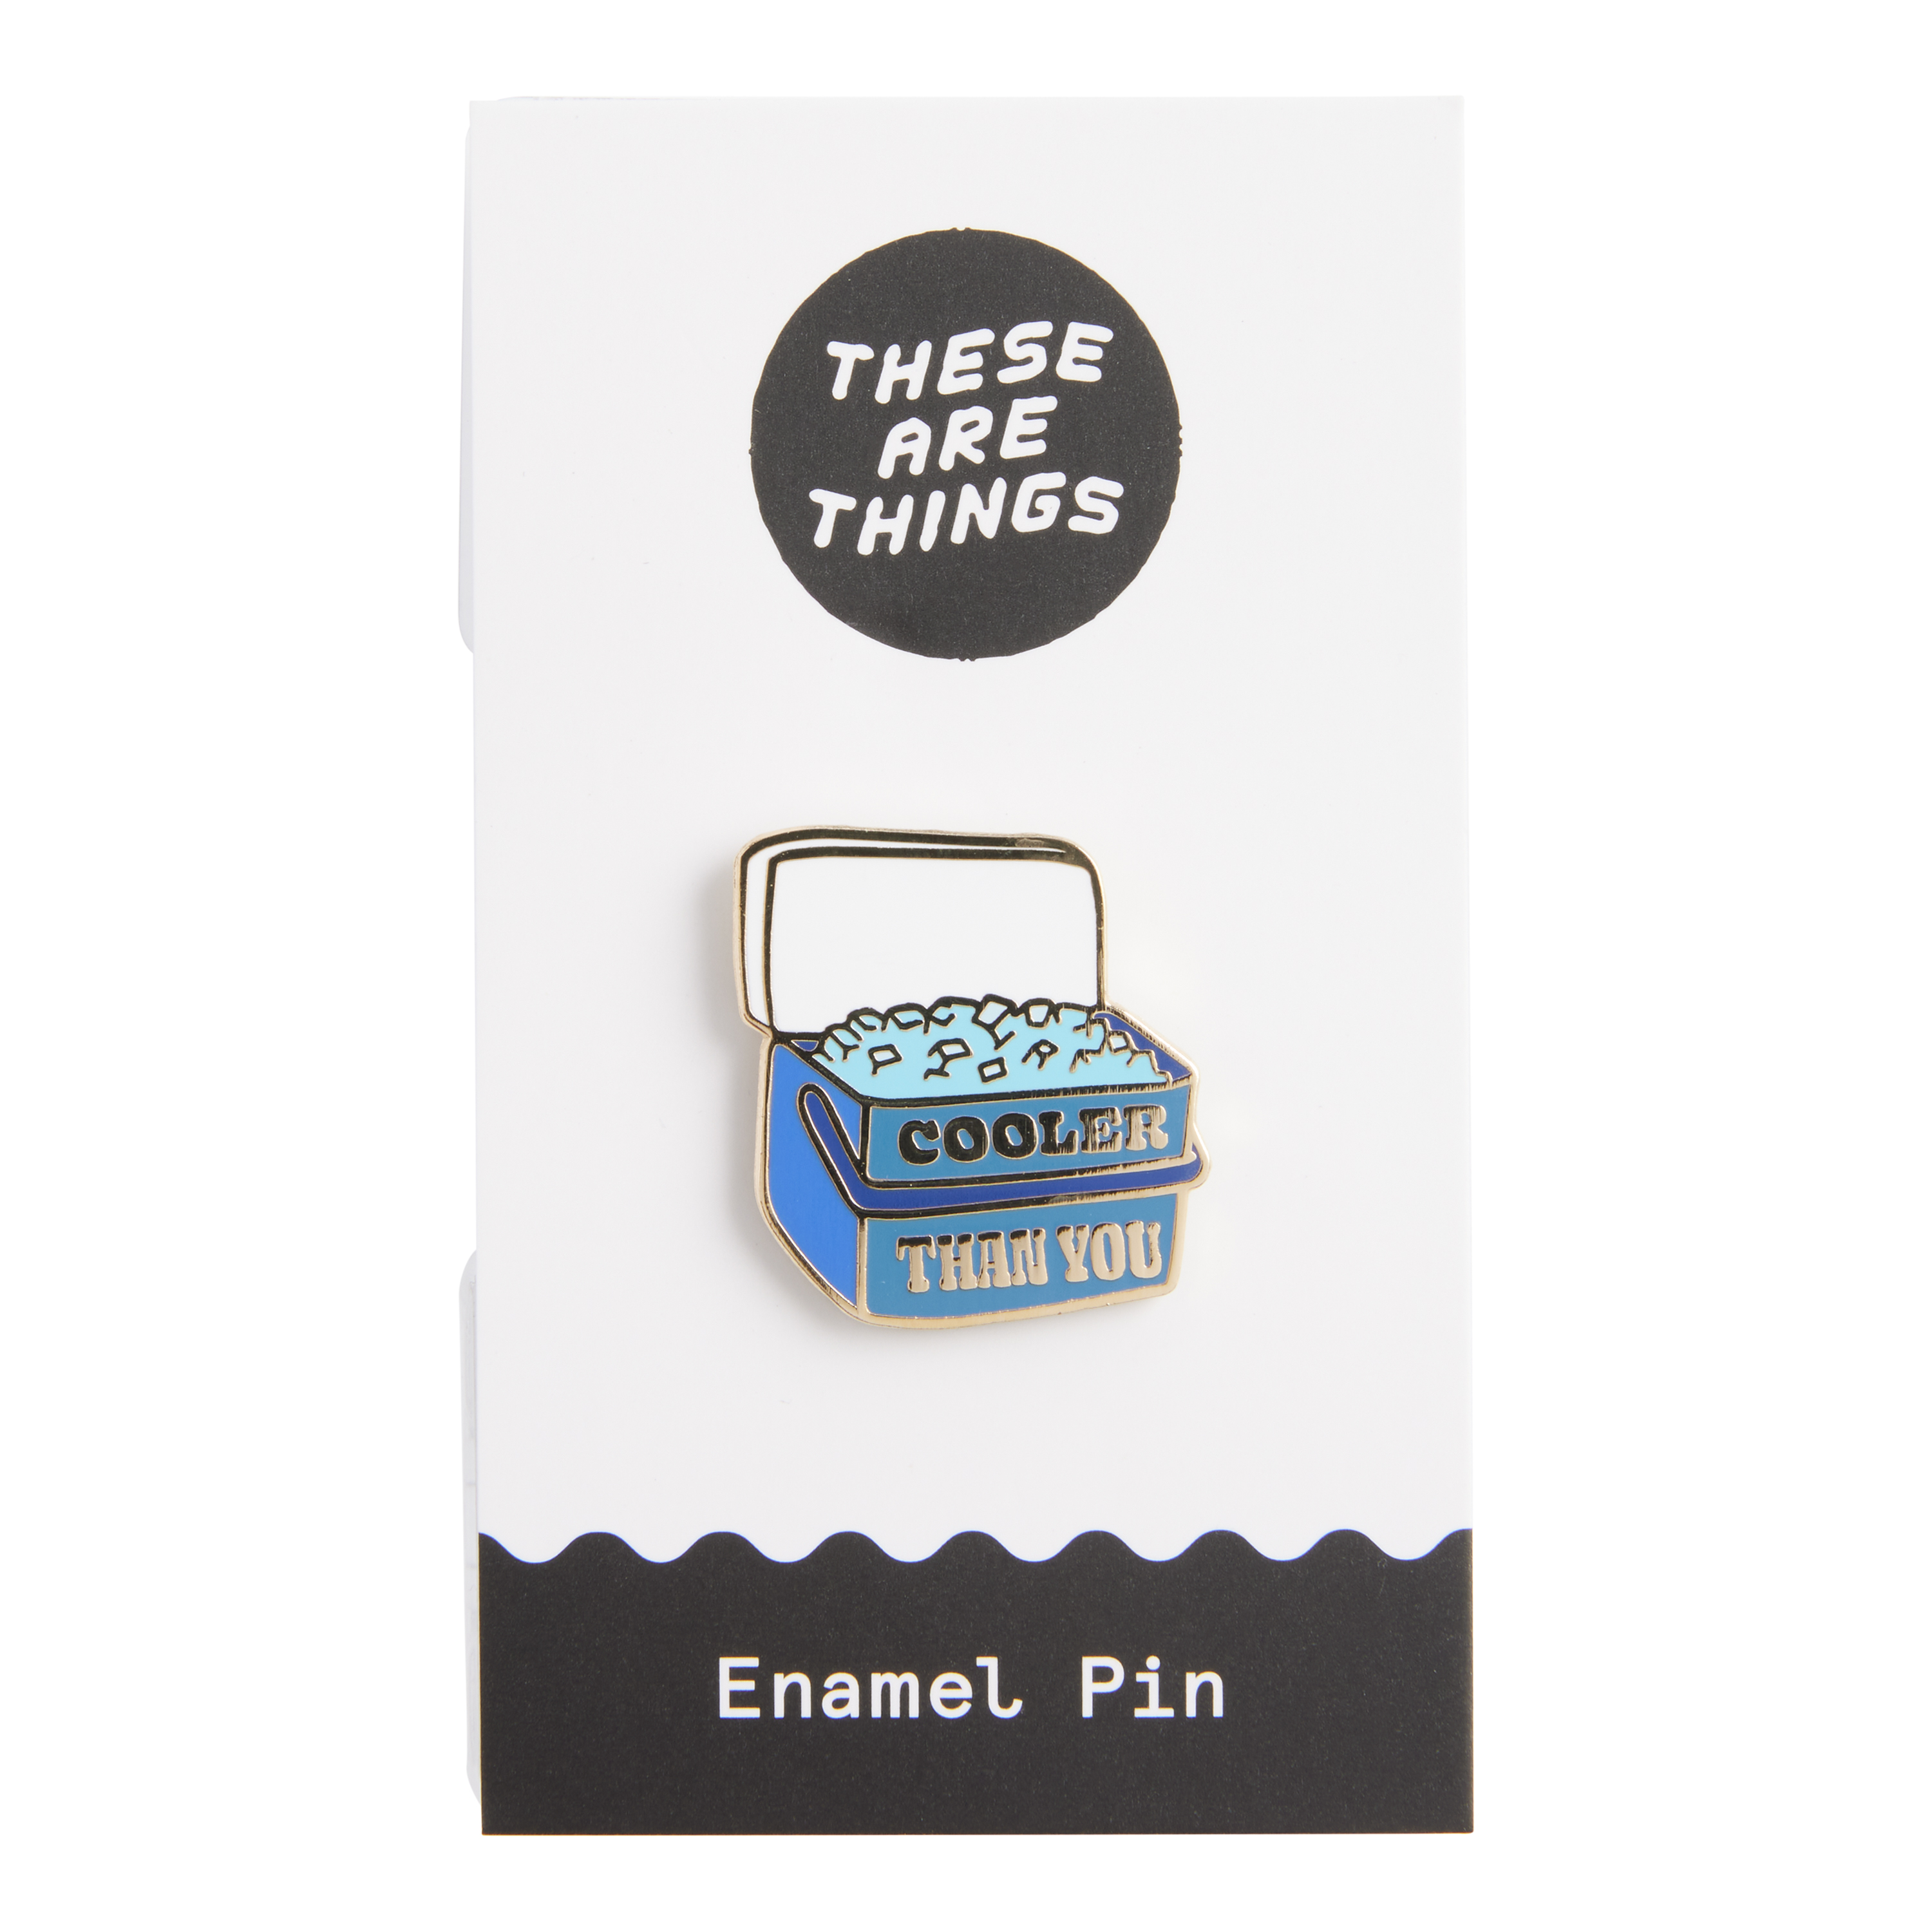 Enamel Pins: 5 Tips To Keep Them From Falling Off